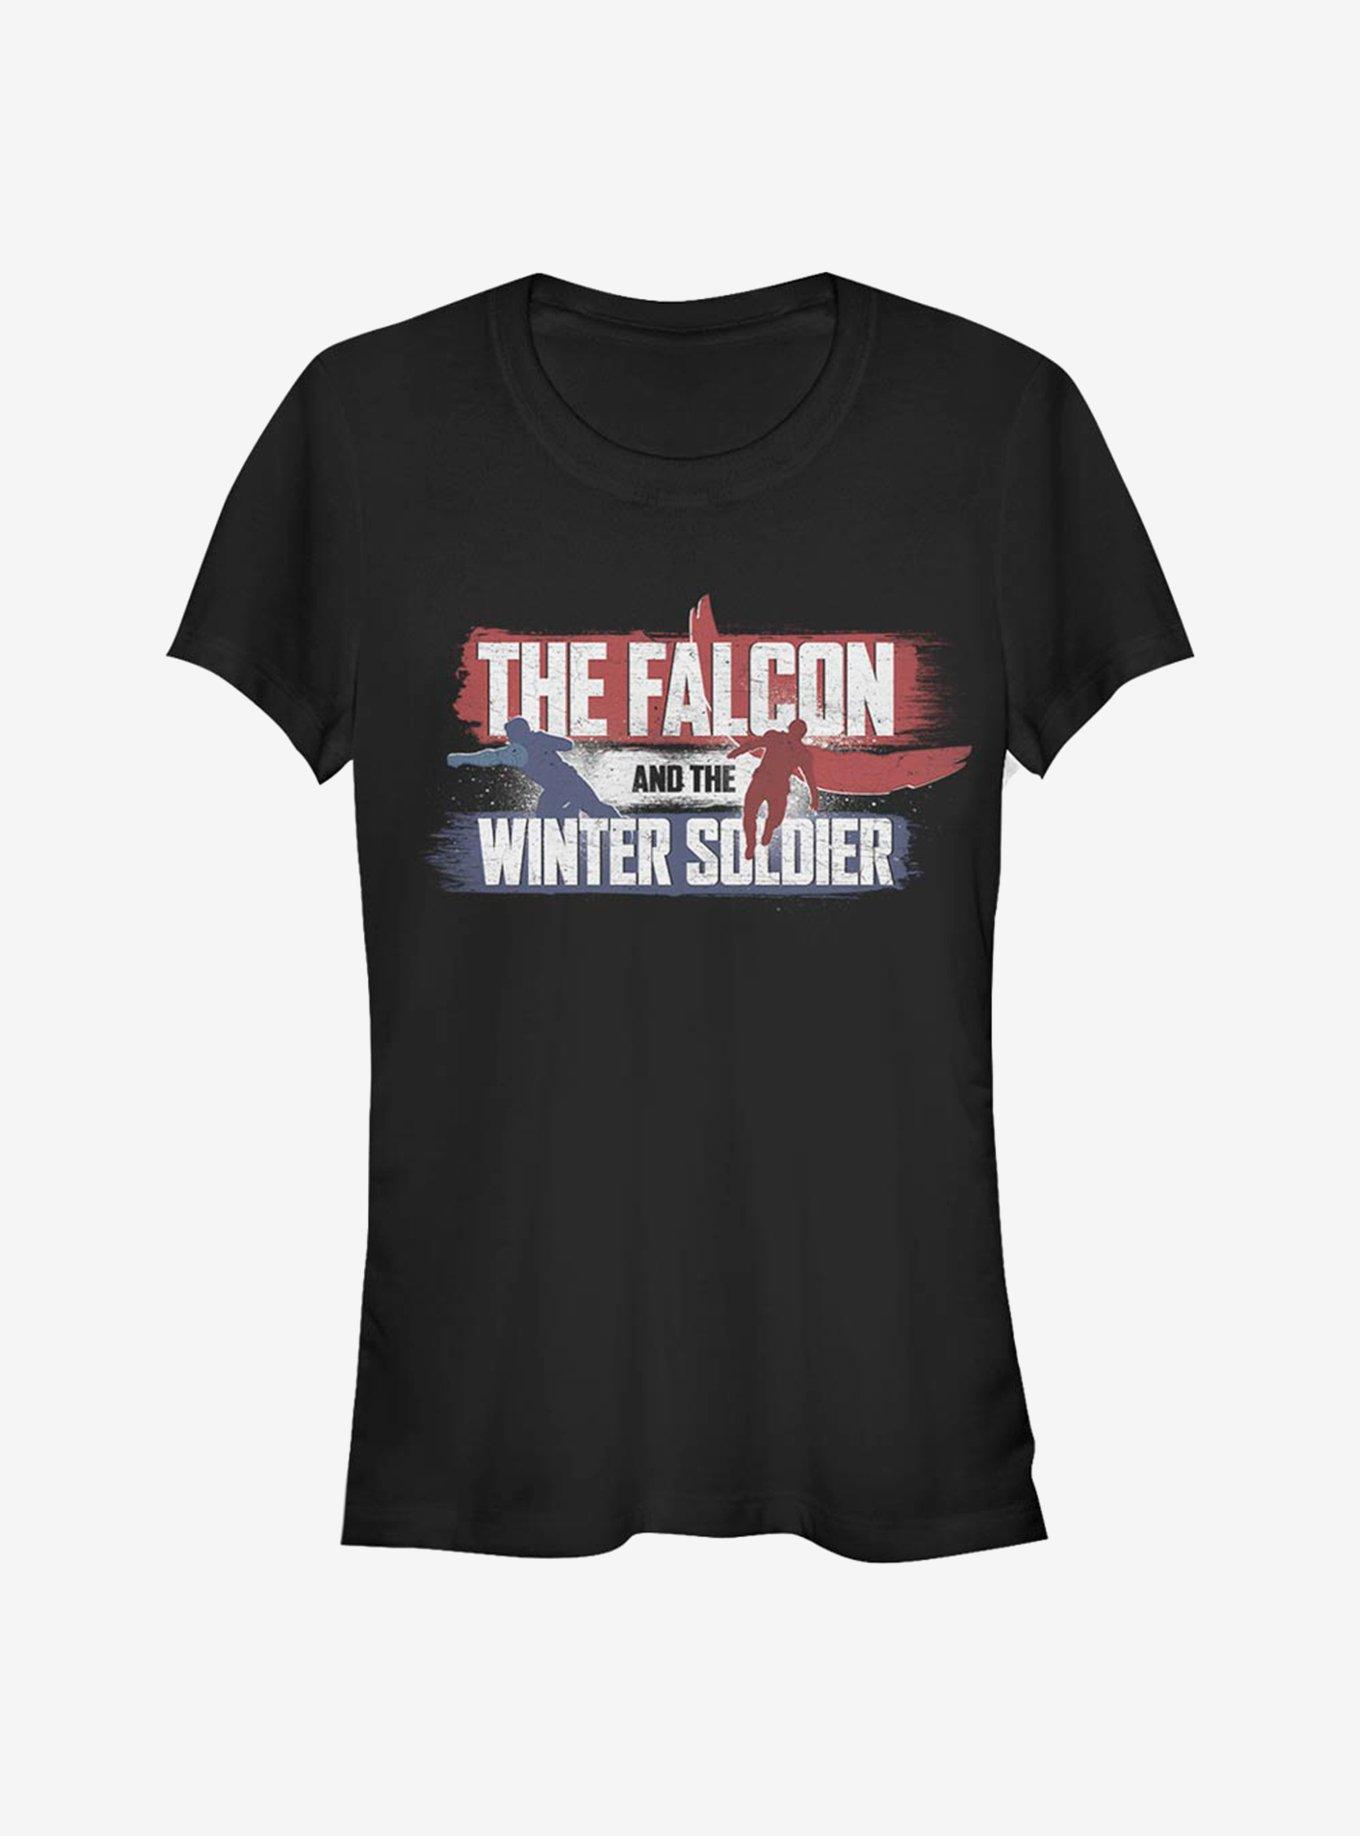 Marvel The Falcon And The Winter Soldier Spray Paint Girls T-Shirt, BLACK, hi-res